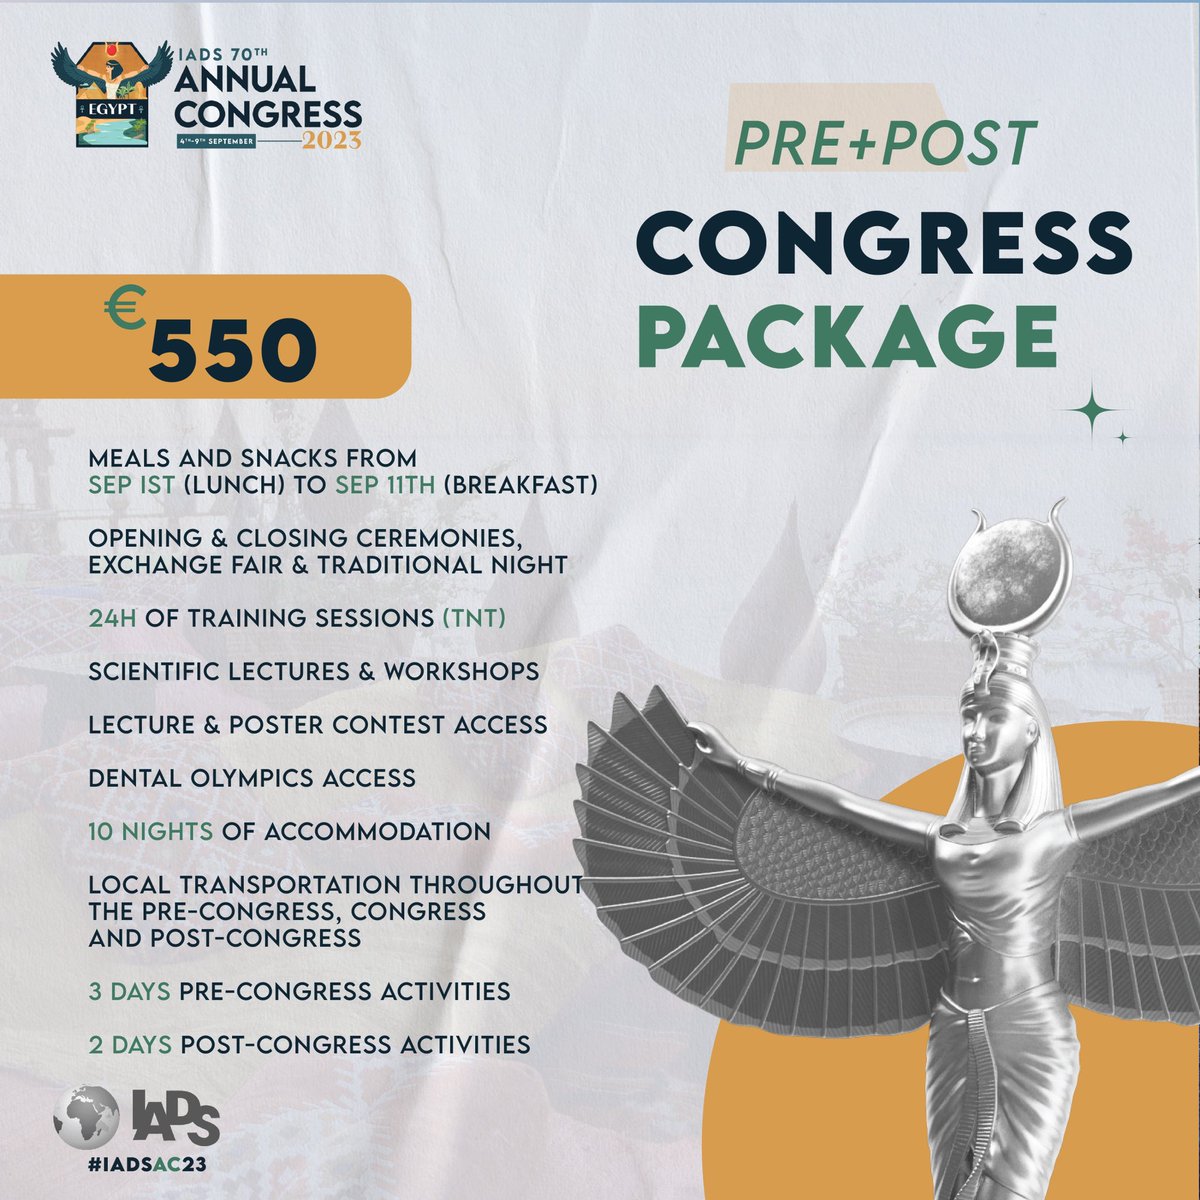 The registration for the IADS 70th Annual Congress is NOW OPEN! Check out the congress packages! Register: congress.iads-web.com Dive into an unforgettable experience with us! 🇪🇬 #iadsac23 #dentalstudents #togetherisbetter #iadsacegypt #exploreegypt